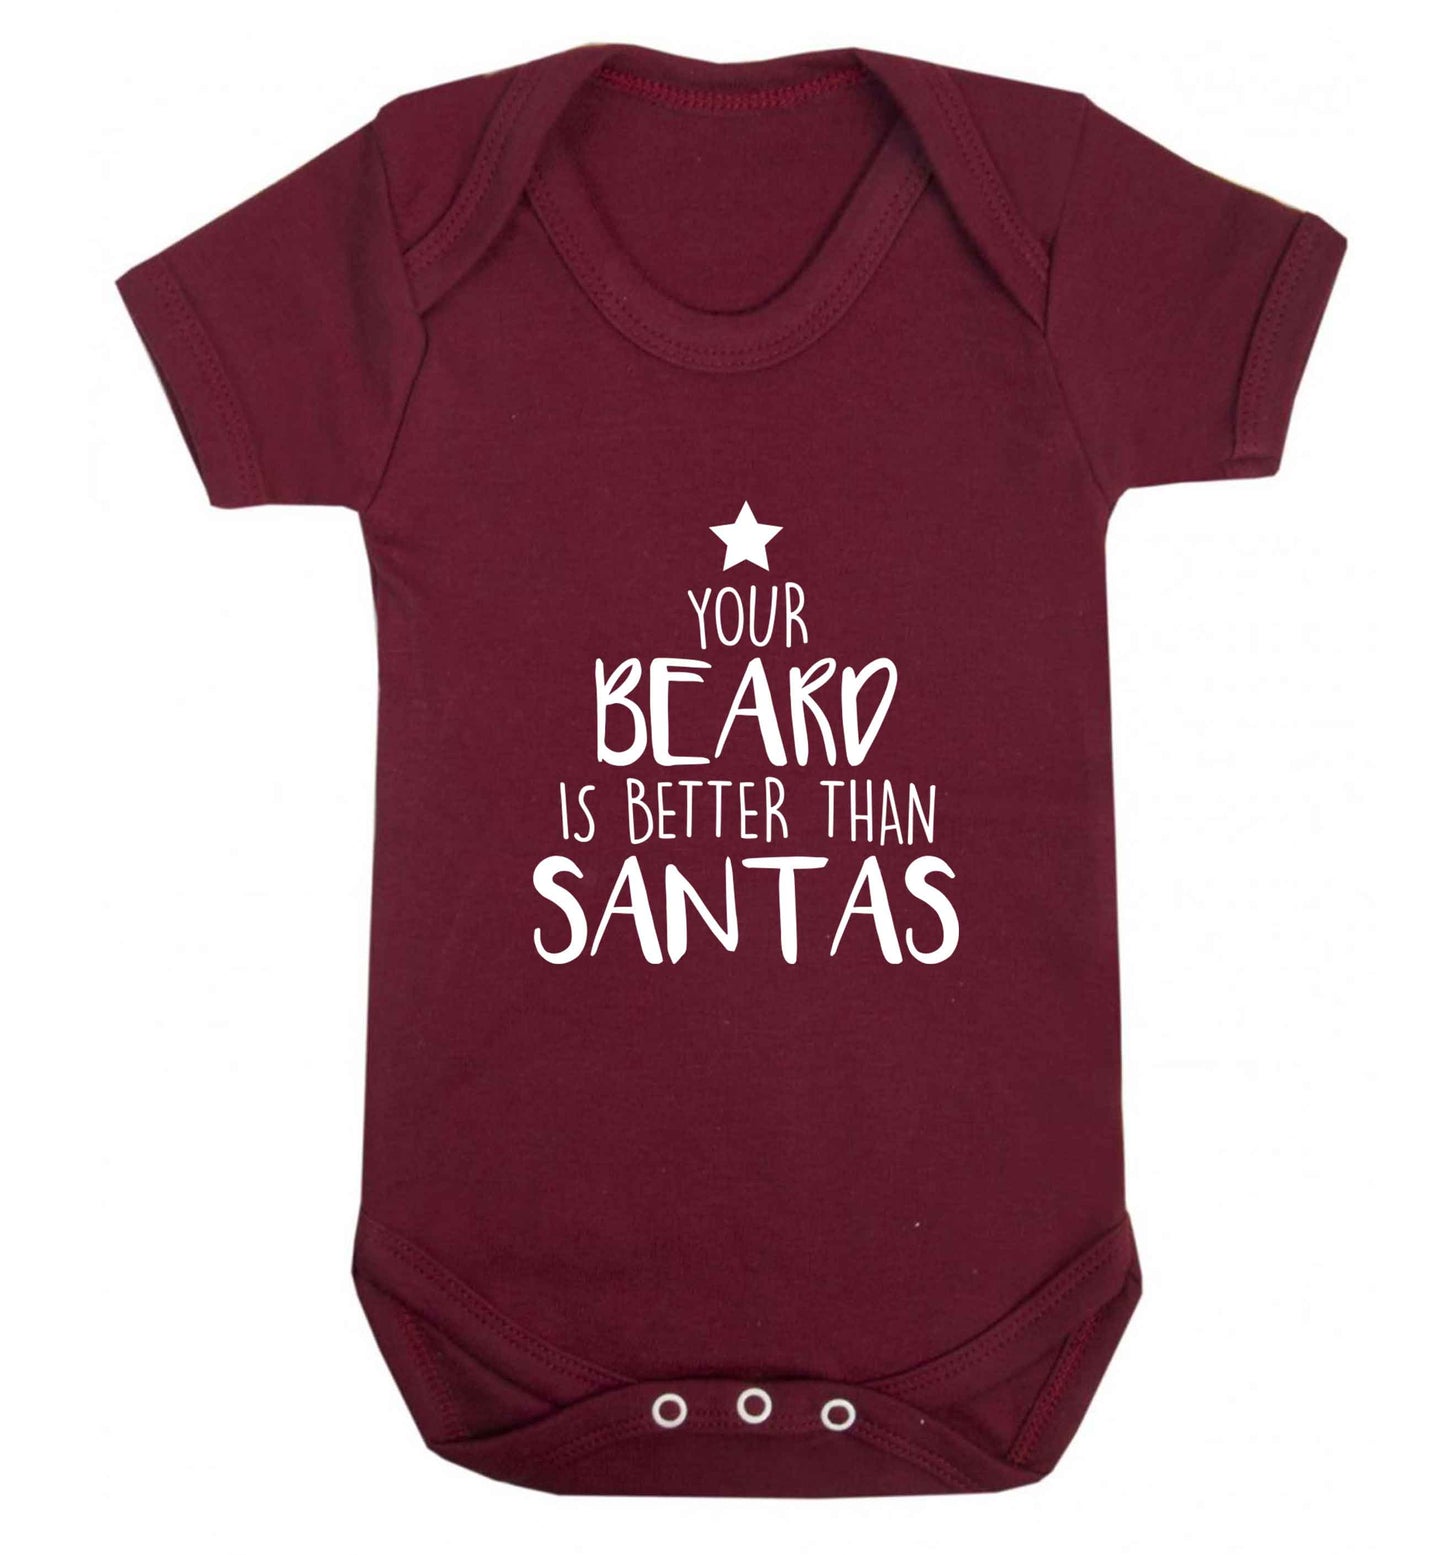 Your Beard Better than Santas baby vest maroon 18-24 months